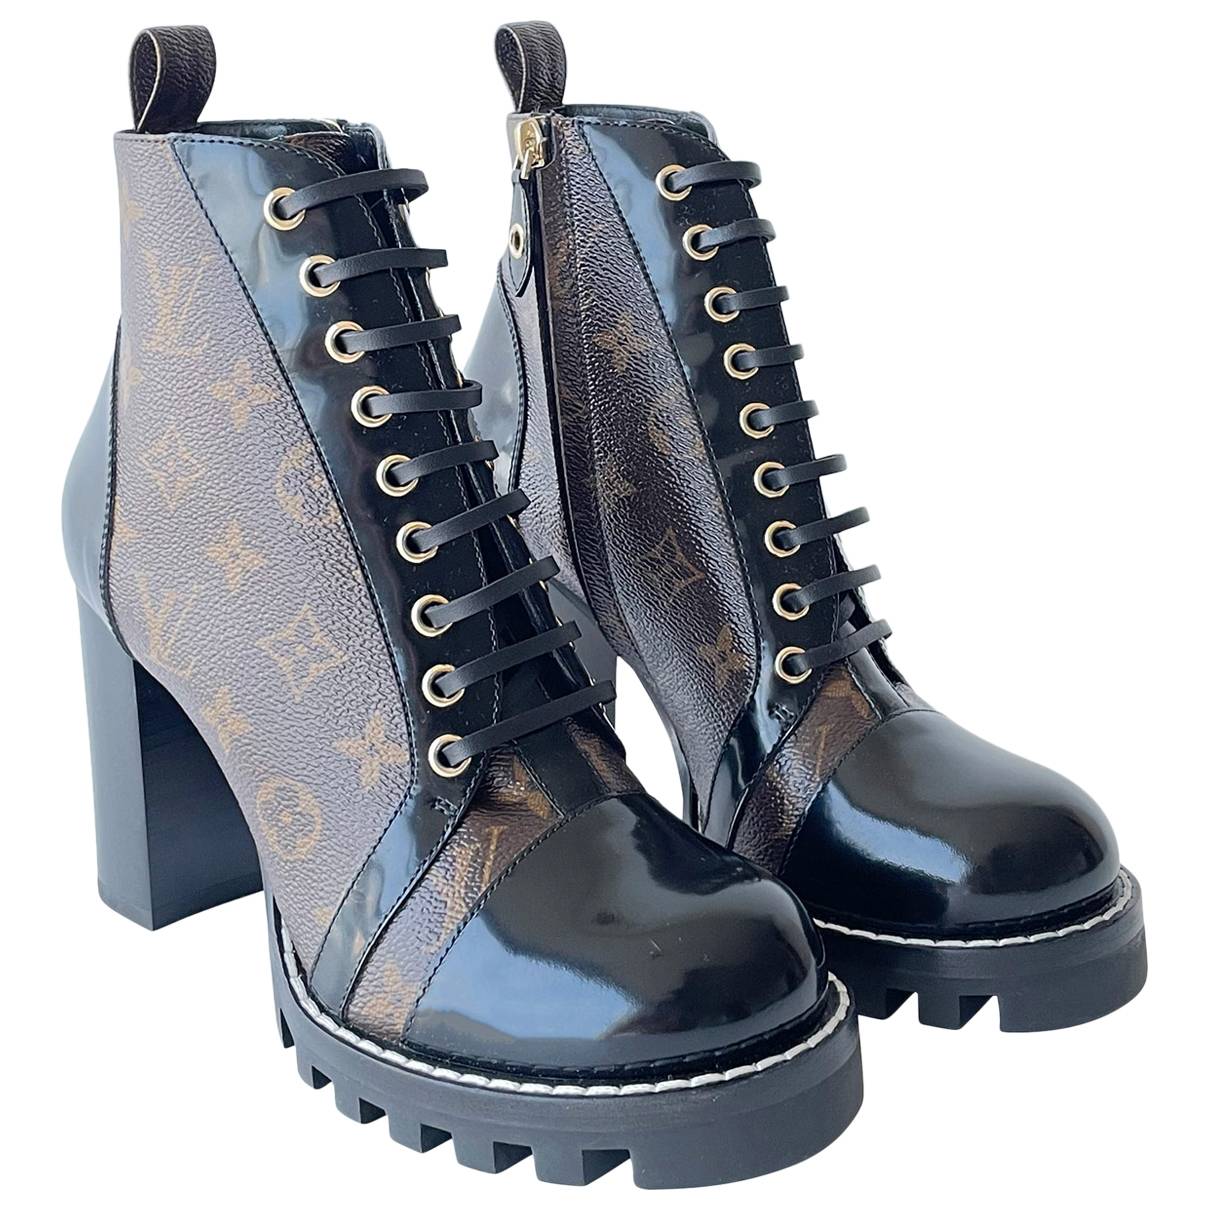 Used Louis Vuitton Monogram Star Trail Ankle Combat Boots 9 SHOES